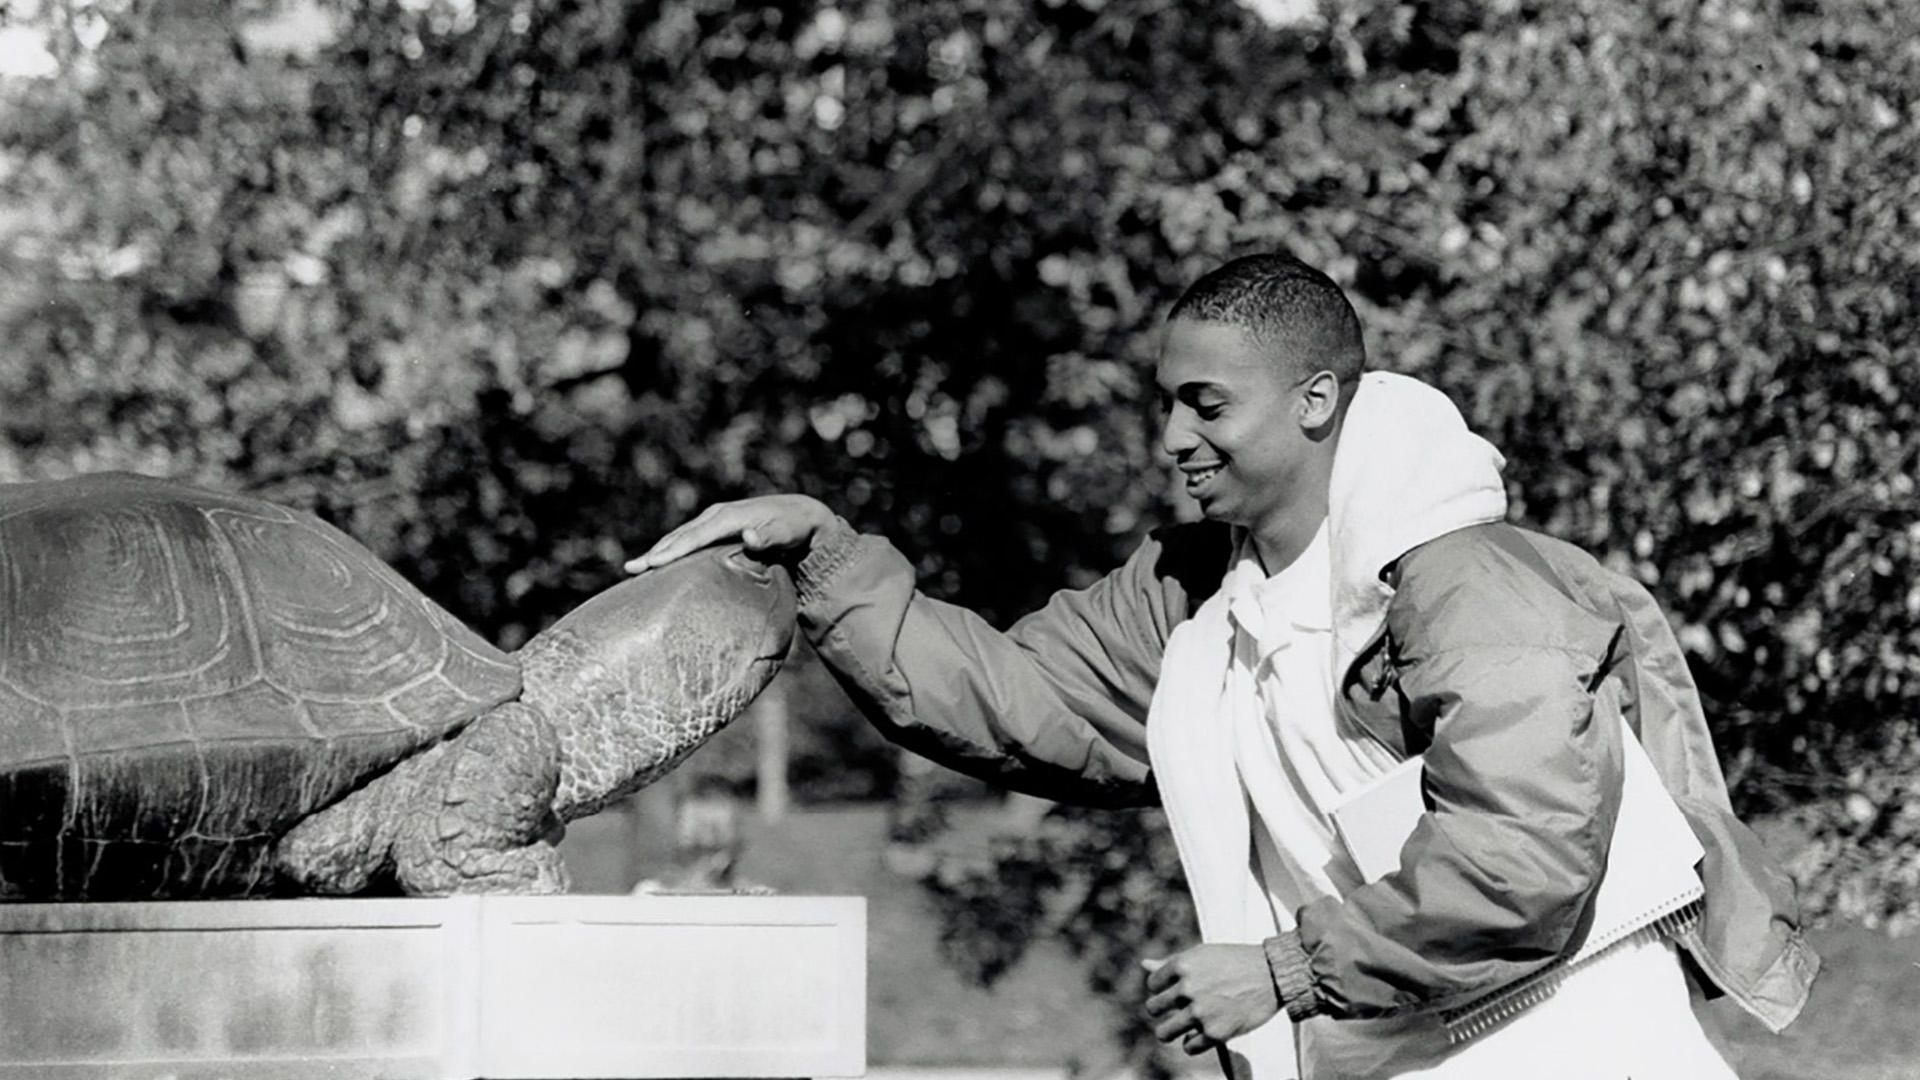 Rubbing Testudo's nose for luck, University of Maryland, April 14, 1994